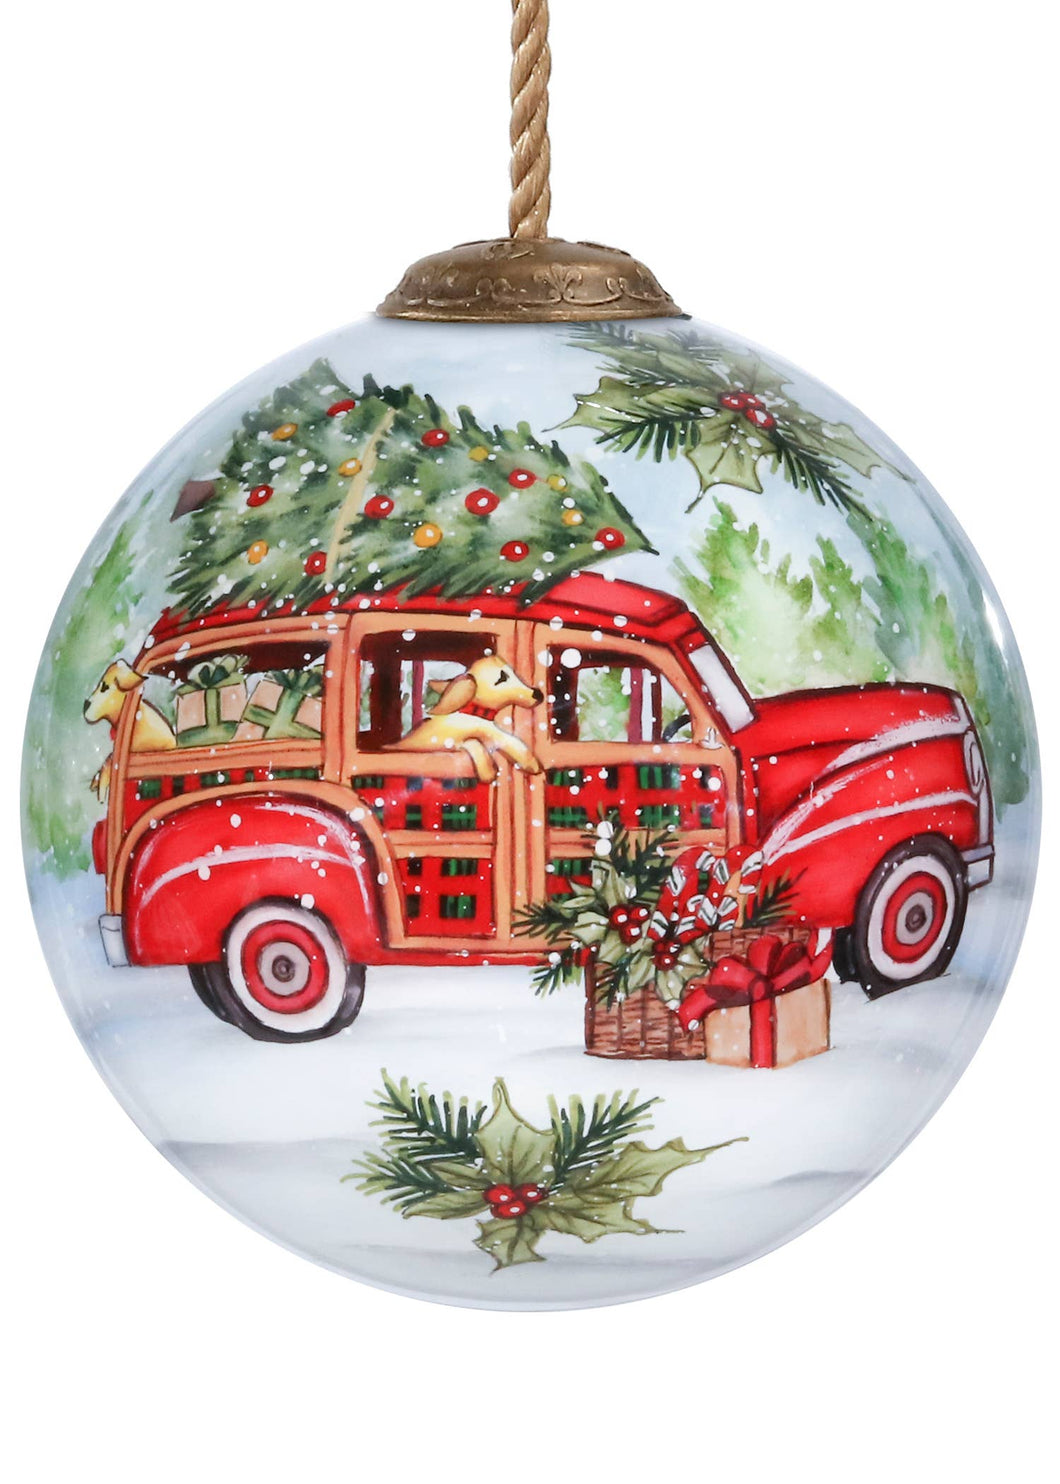 I'll Be Home for Christmas Red Wagon Glass Christmas ornament - Hand Painted